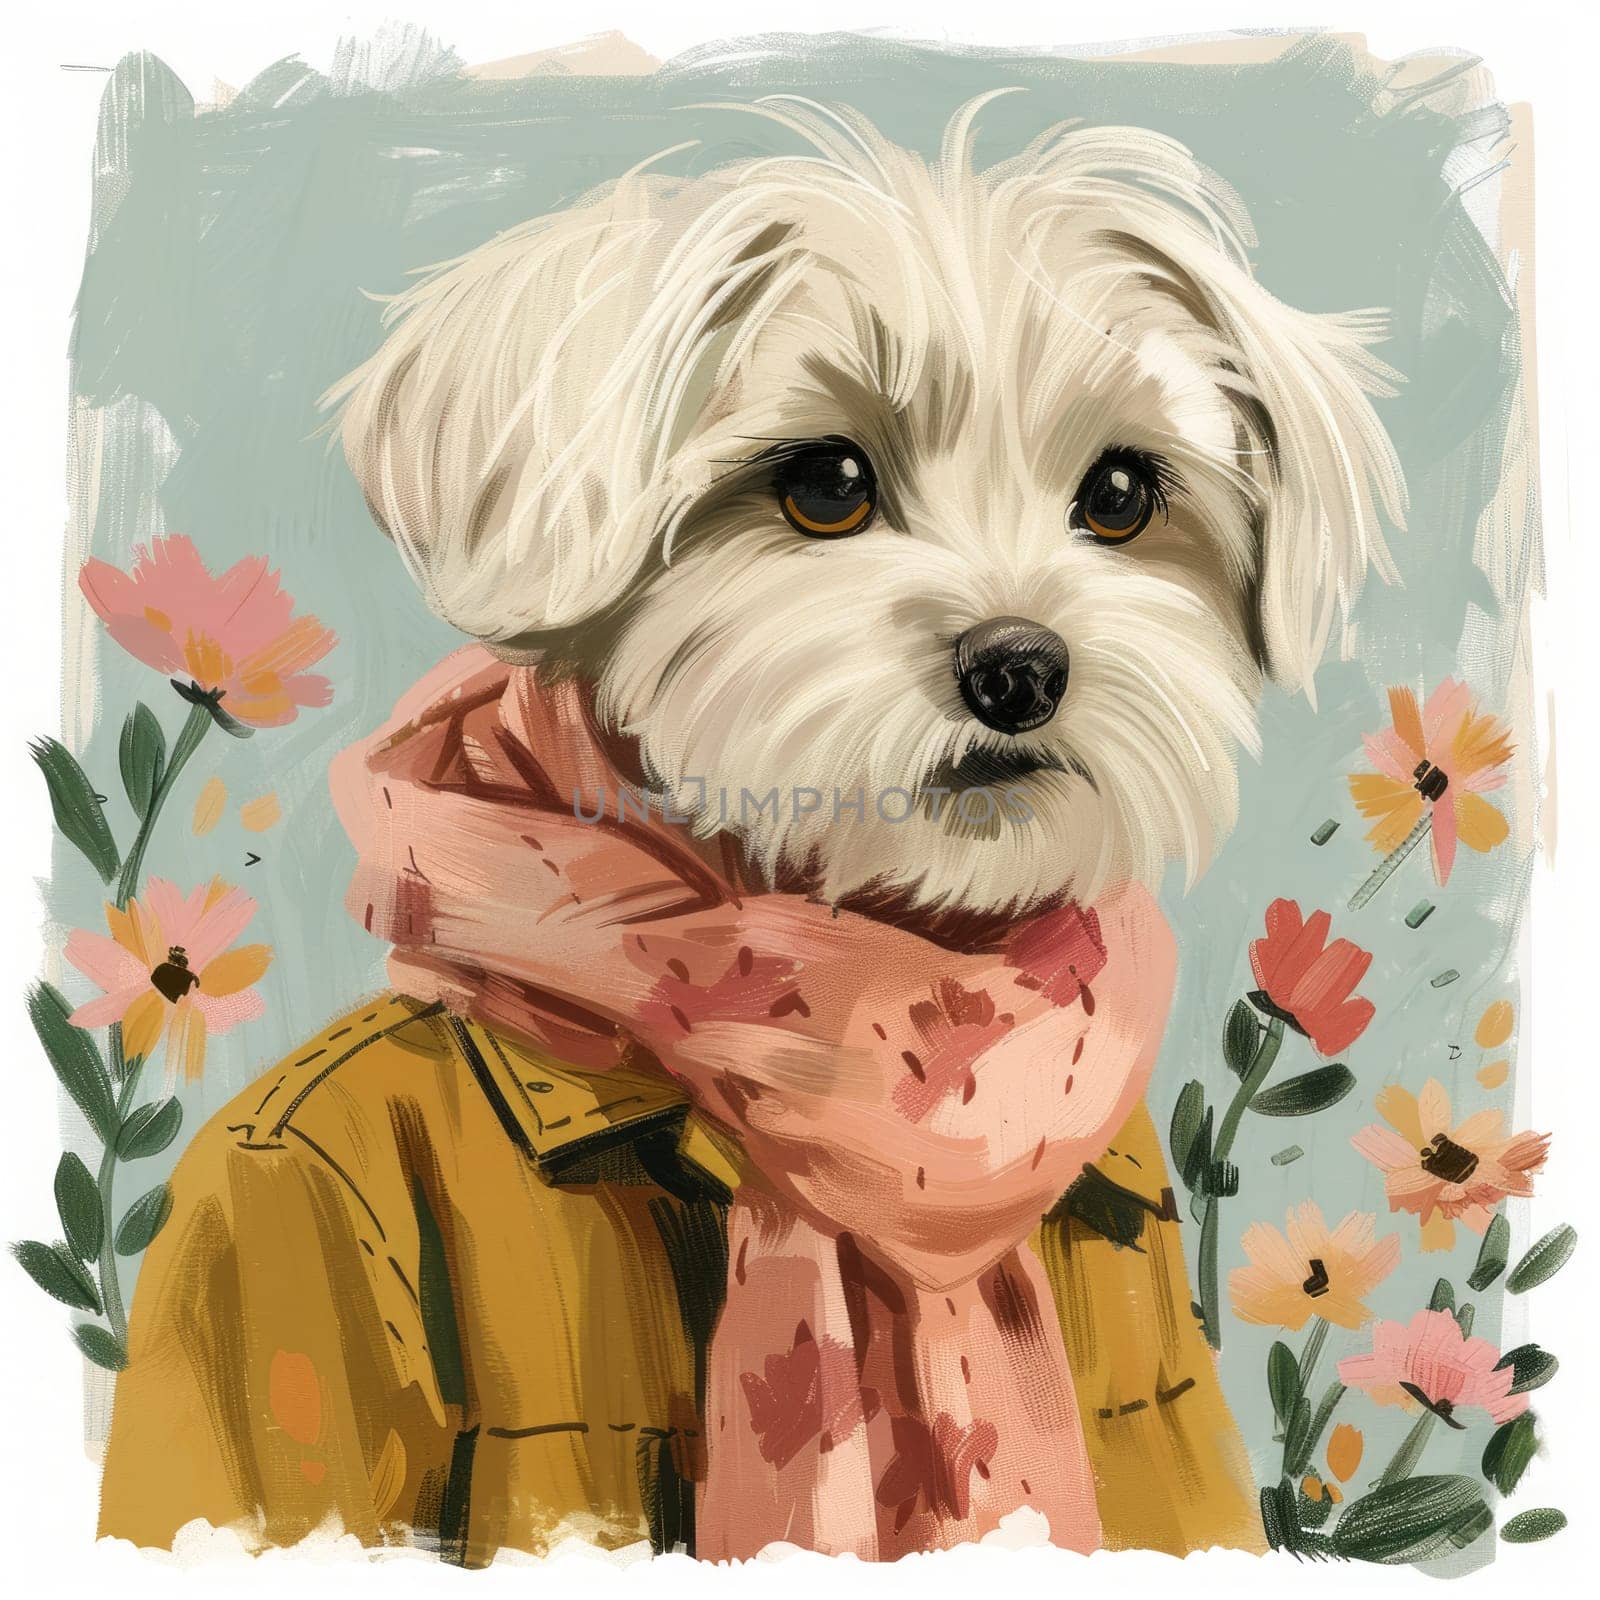 Cute Adorable Poster with Maltese Dog and Flowers. Pastel Puppy Illustration. by iliris